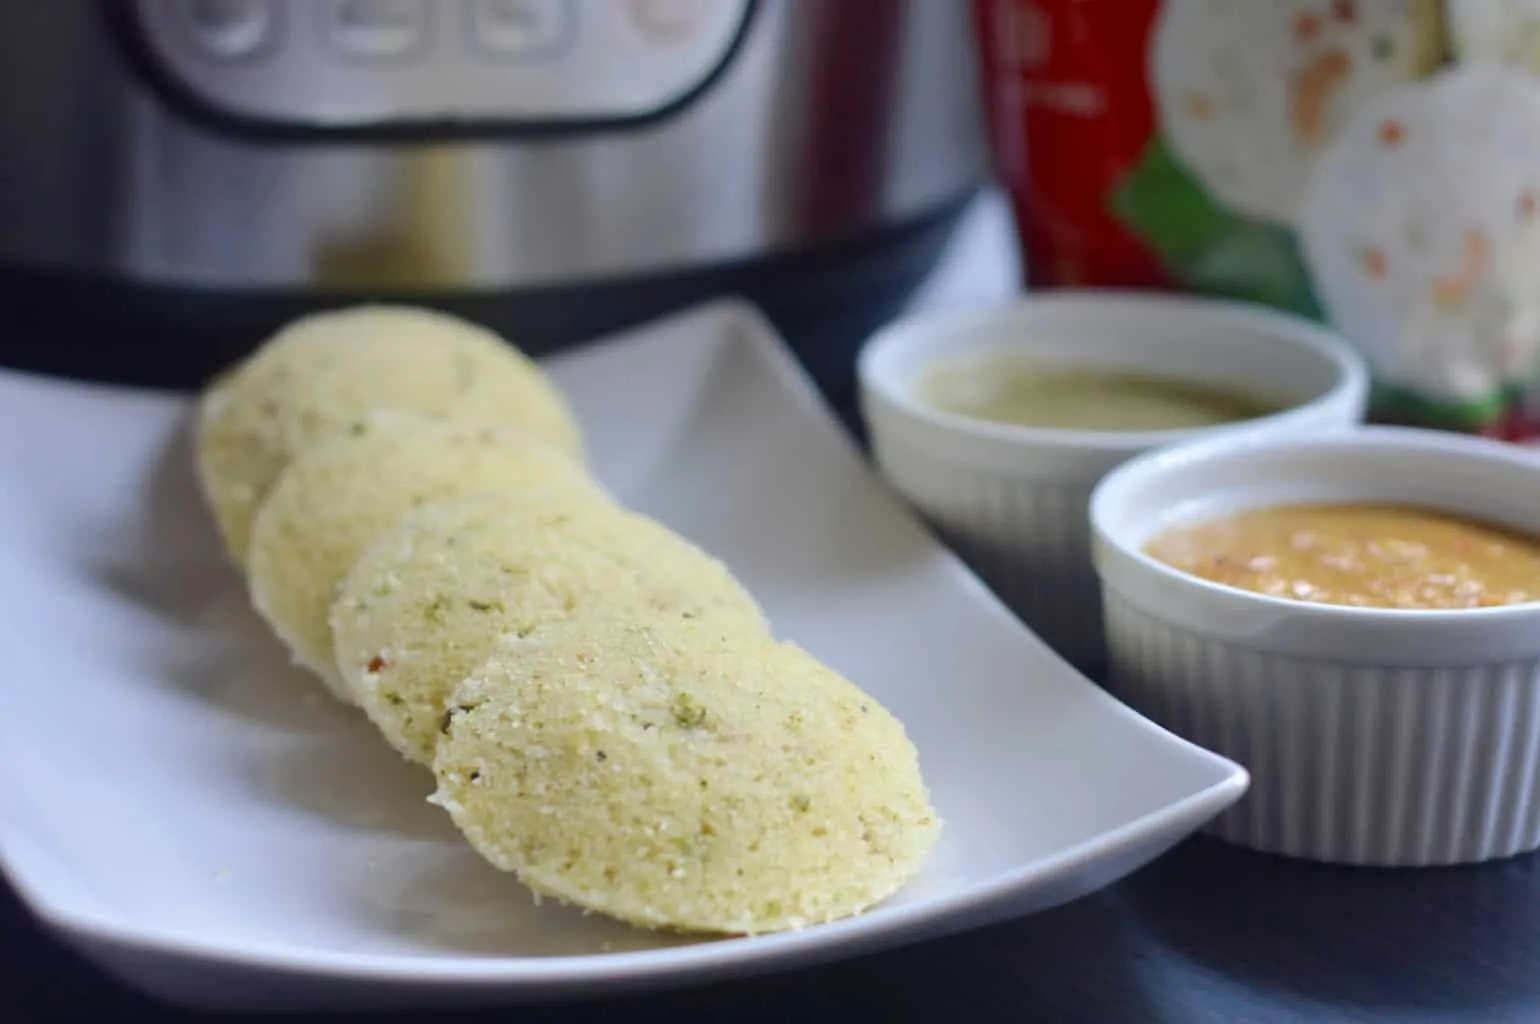 Soft and fluffy Idli or savory rice cakes steamed in an Instant Pot.